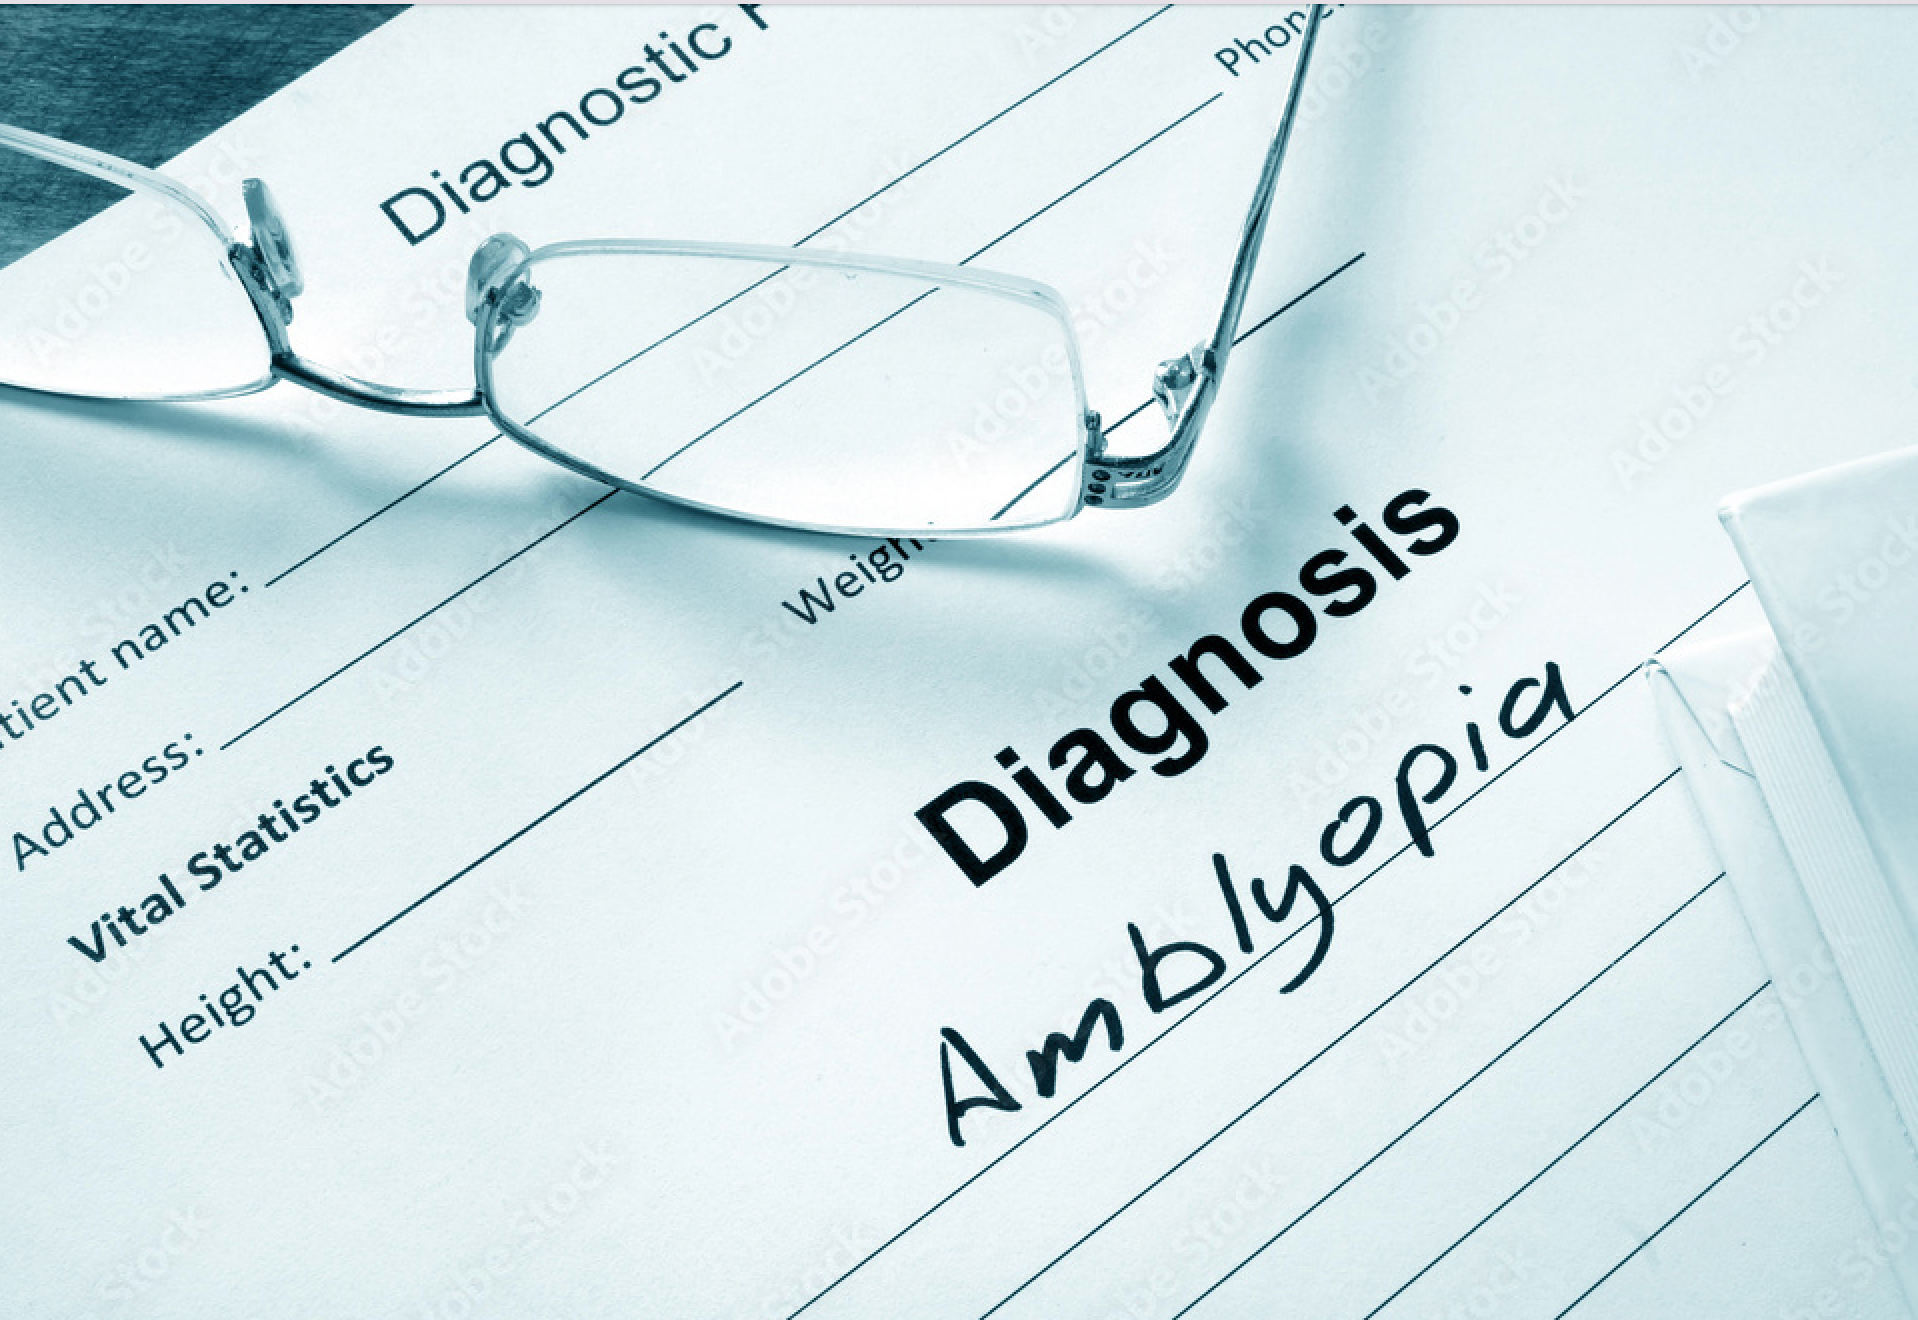 The company noted that CureSight received FDA clearance based on a pivotal study that found the device to be non-inferior to eye patching – the current gold standard of care - for amblyopia treatment in children.